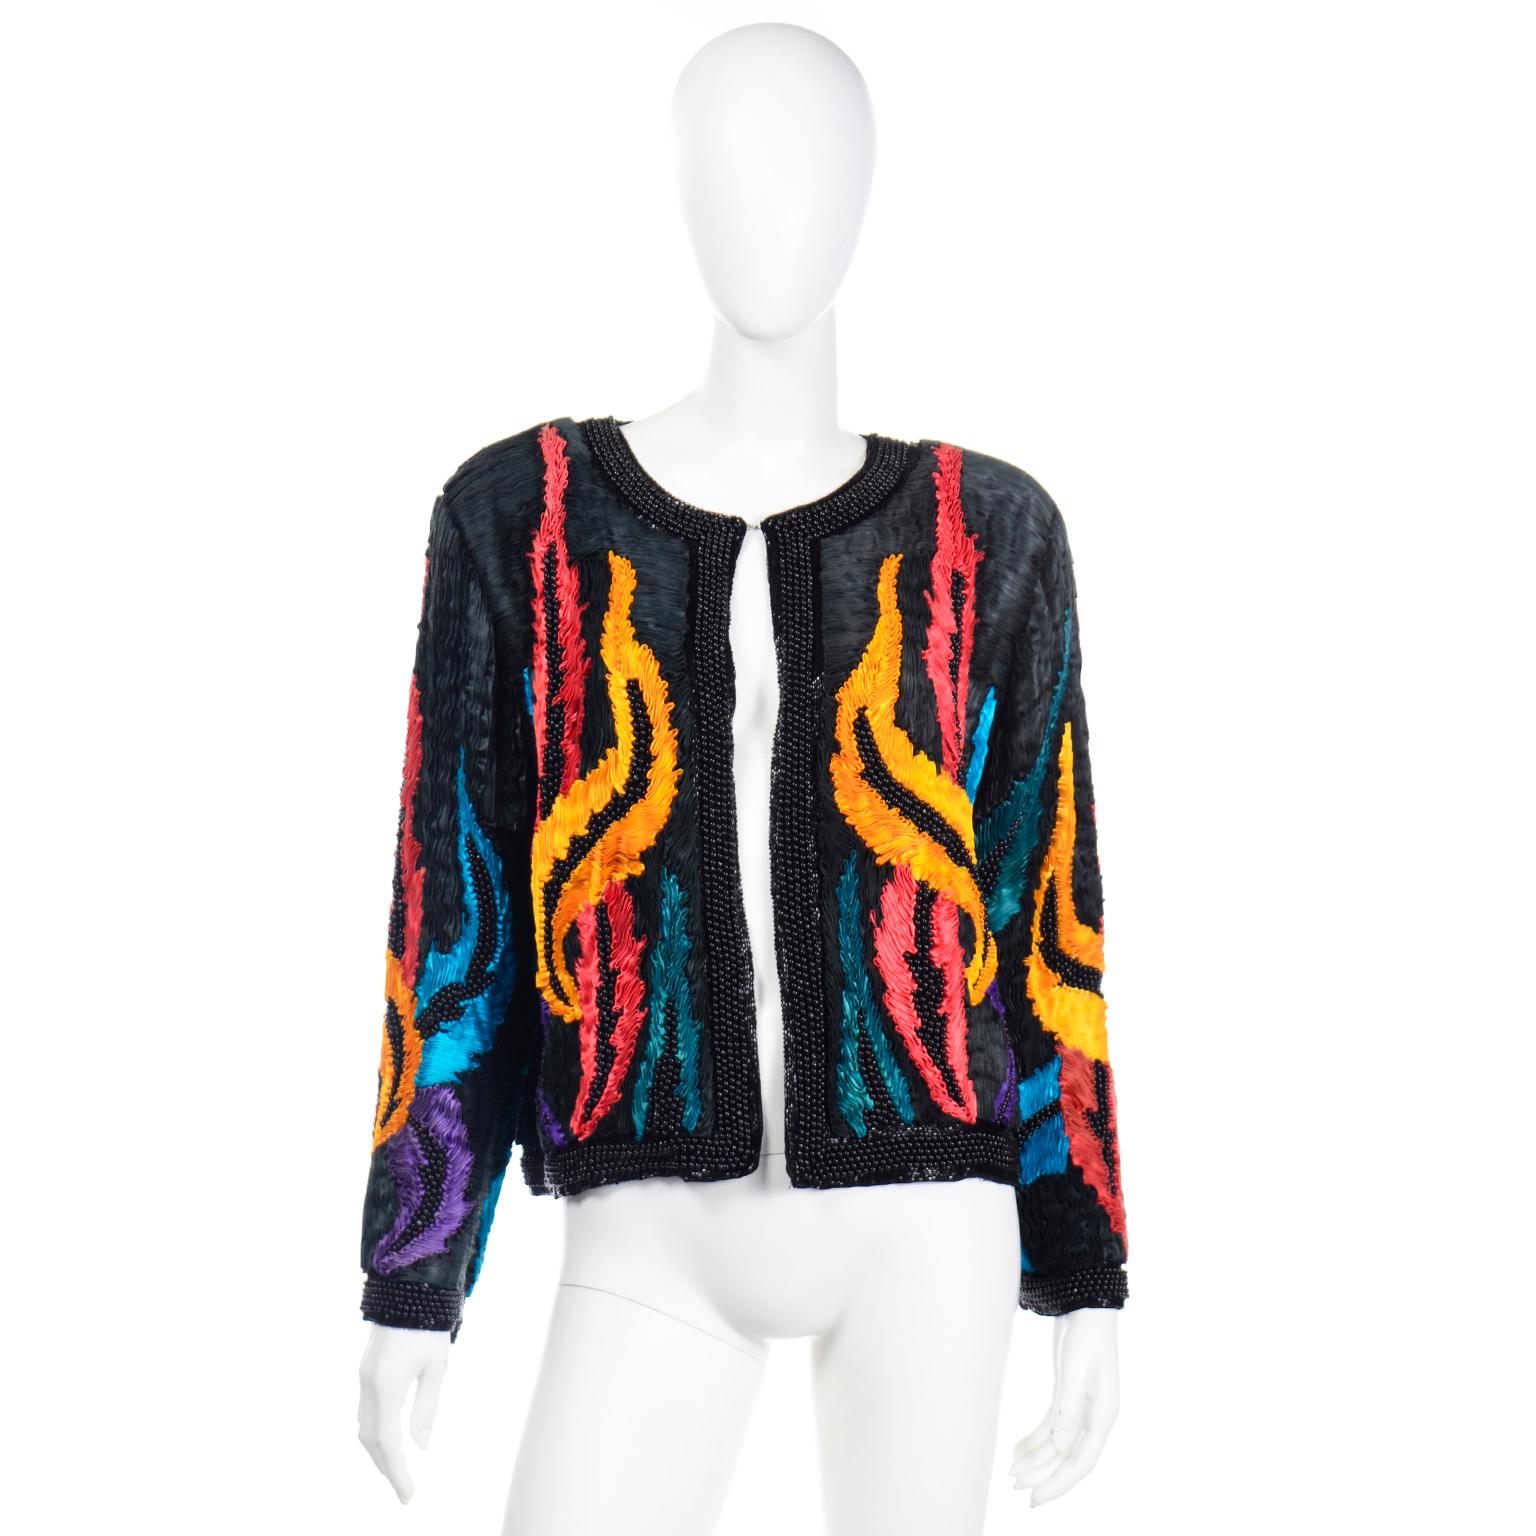 This is a very unique silk vintage beaded jacket with pleated soutache style detailing. This black jacket has ripples of fabric that give a 3d effect to the piece and it has strips of red, blue and marigold to give it even more interest.  The front